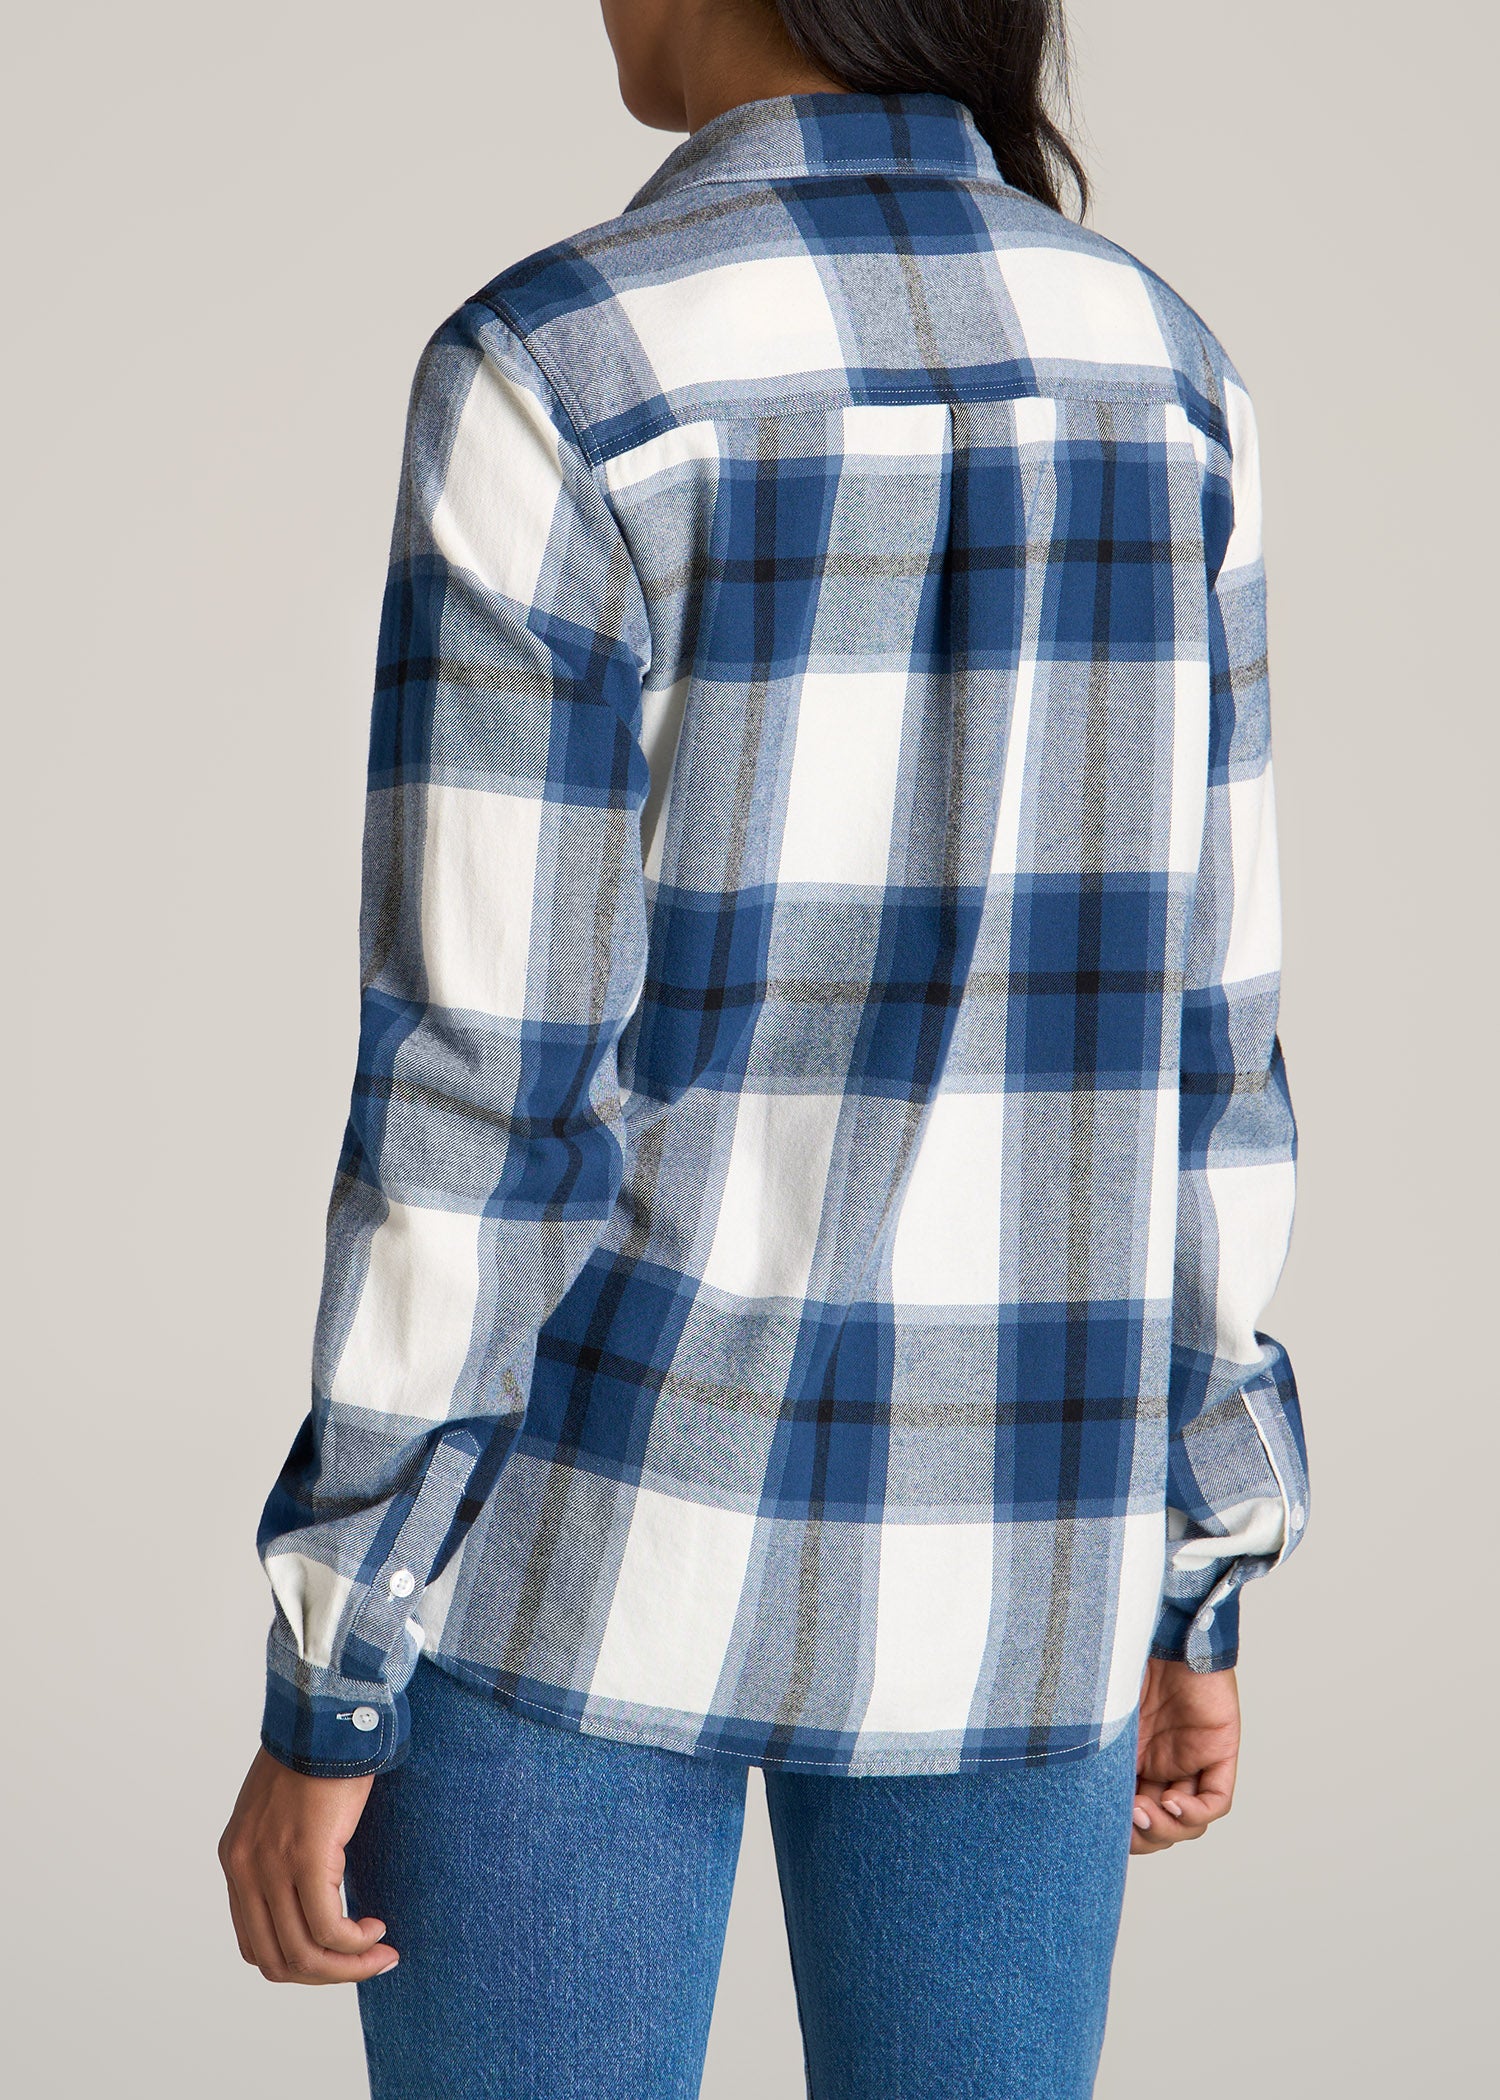 Flannel Button-Up Shirt for Tall Women in Ocean Blue and White 2XL / Tall / Ocean Blue and White